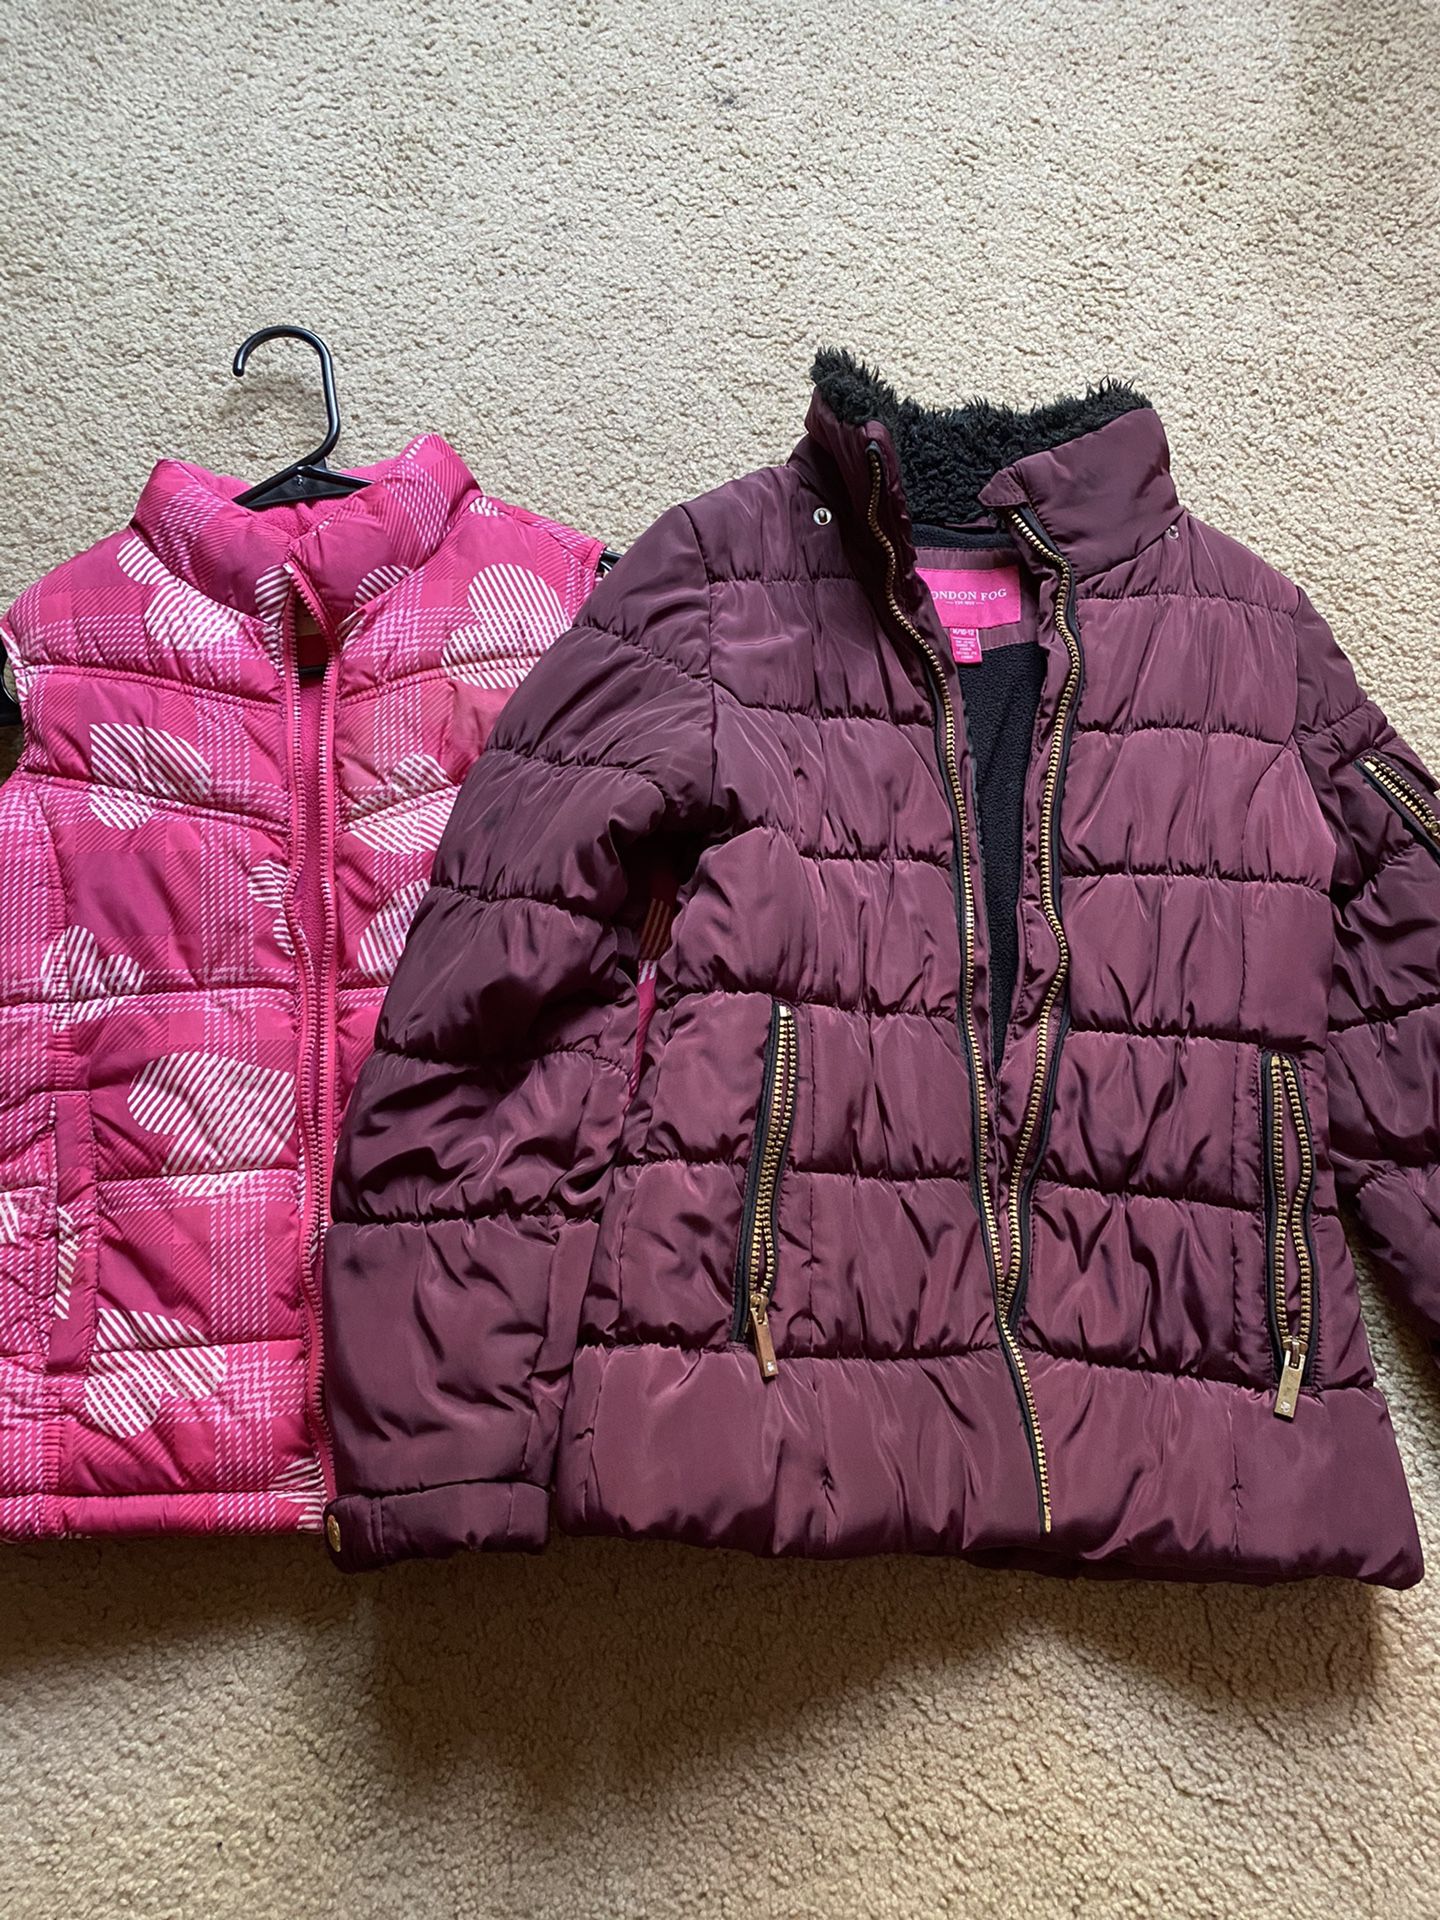 Girls 10-12 winter sweaters and jackets